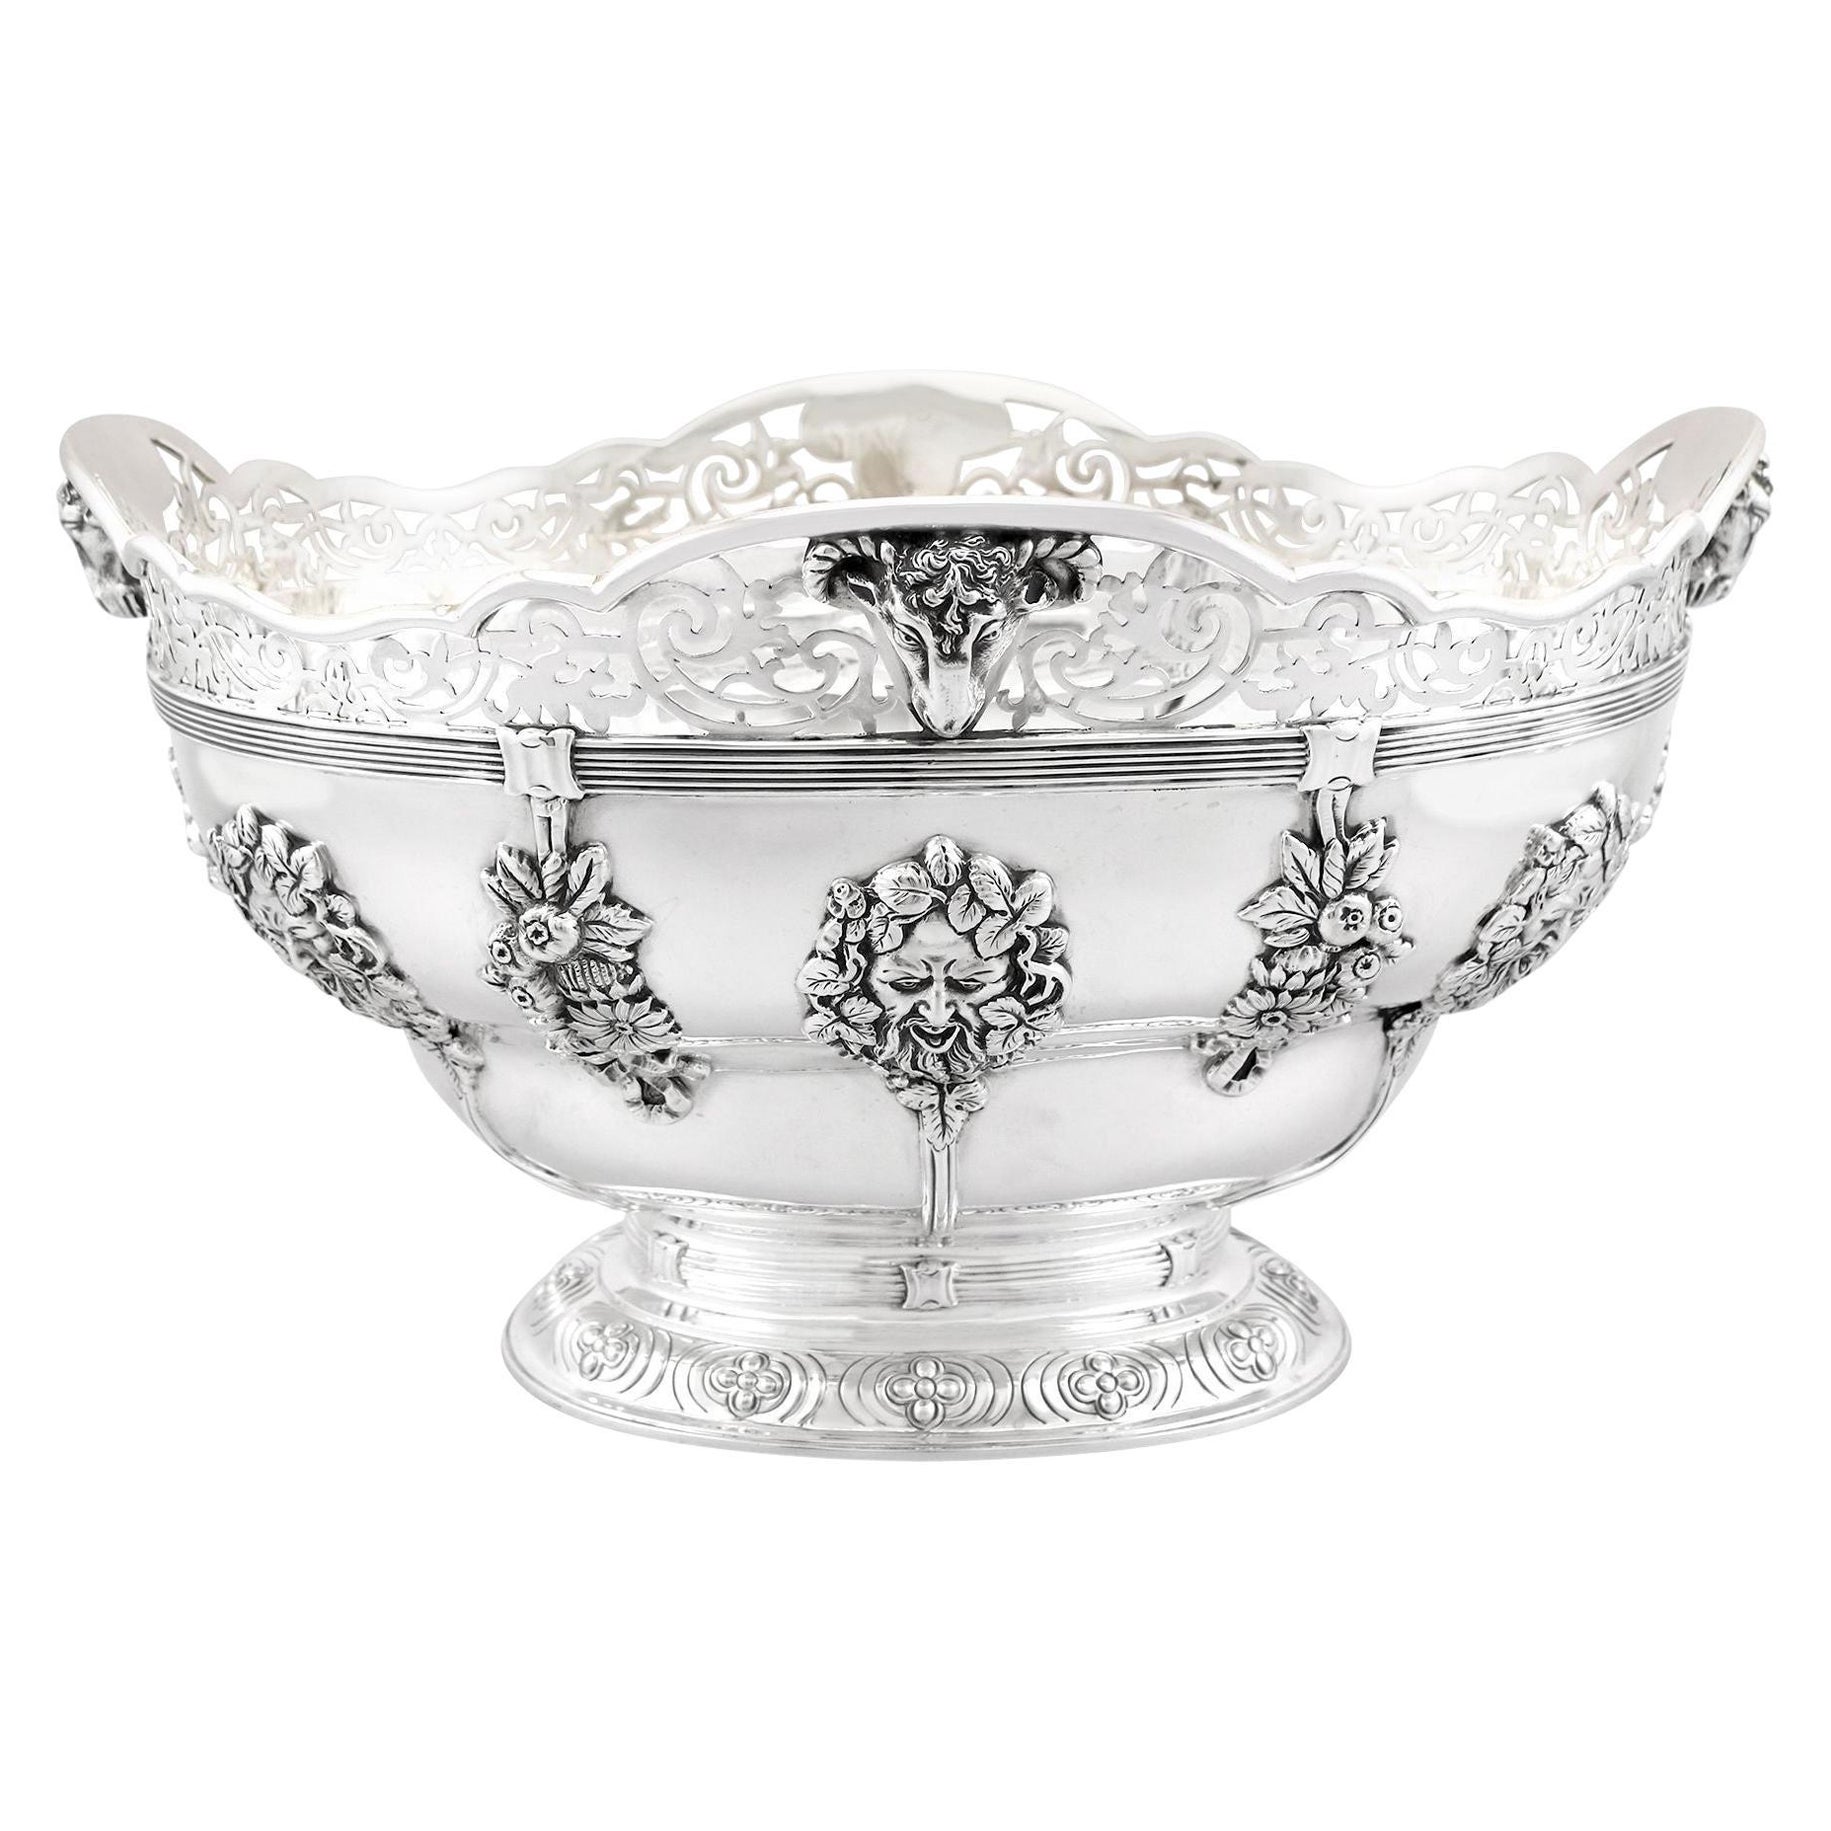 Wakely & Wheeler Antique Sterling Silver Presentation Bowl